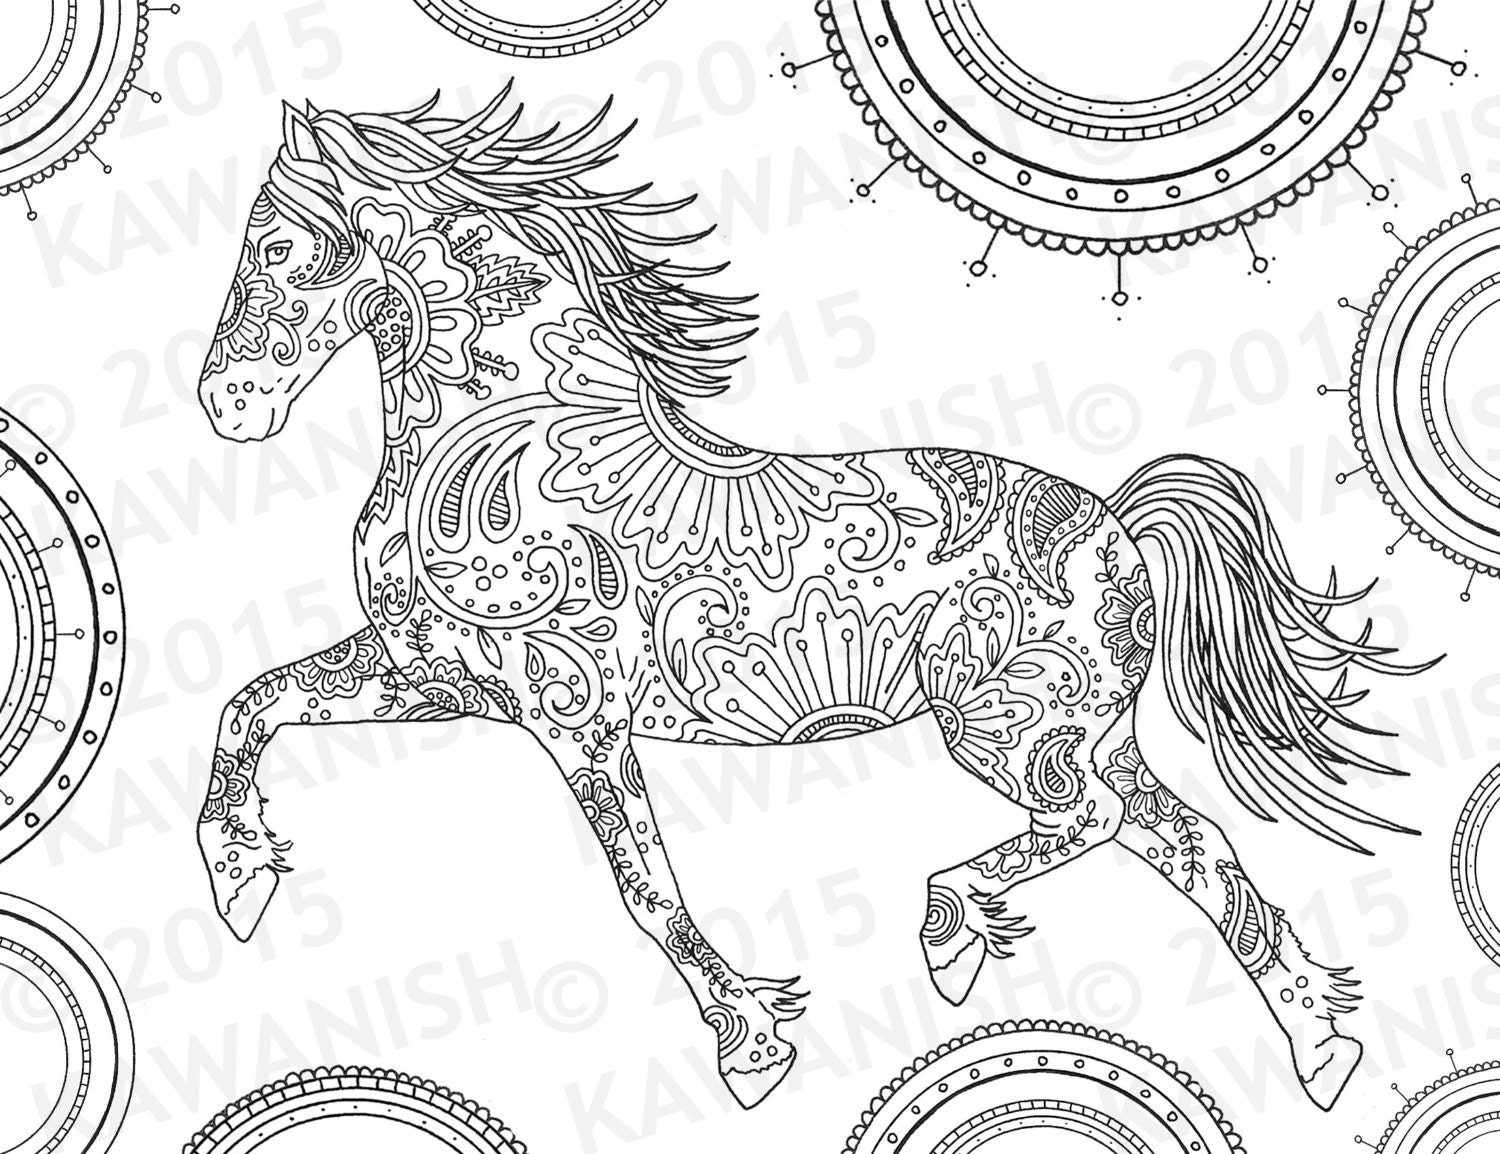 Download horse adult coloring page gift wall art mandala zentangle